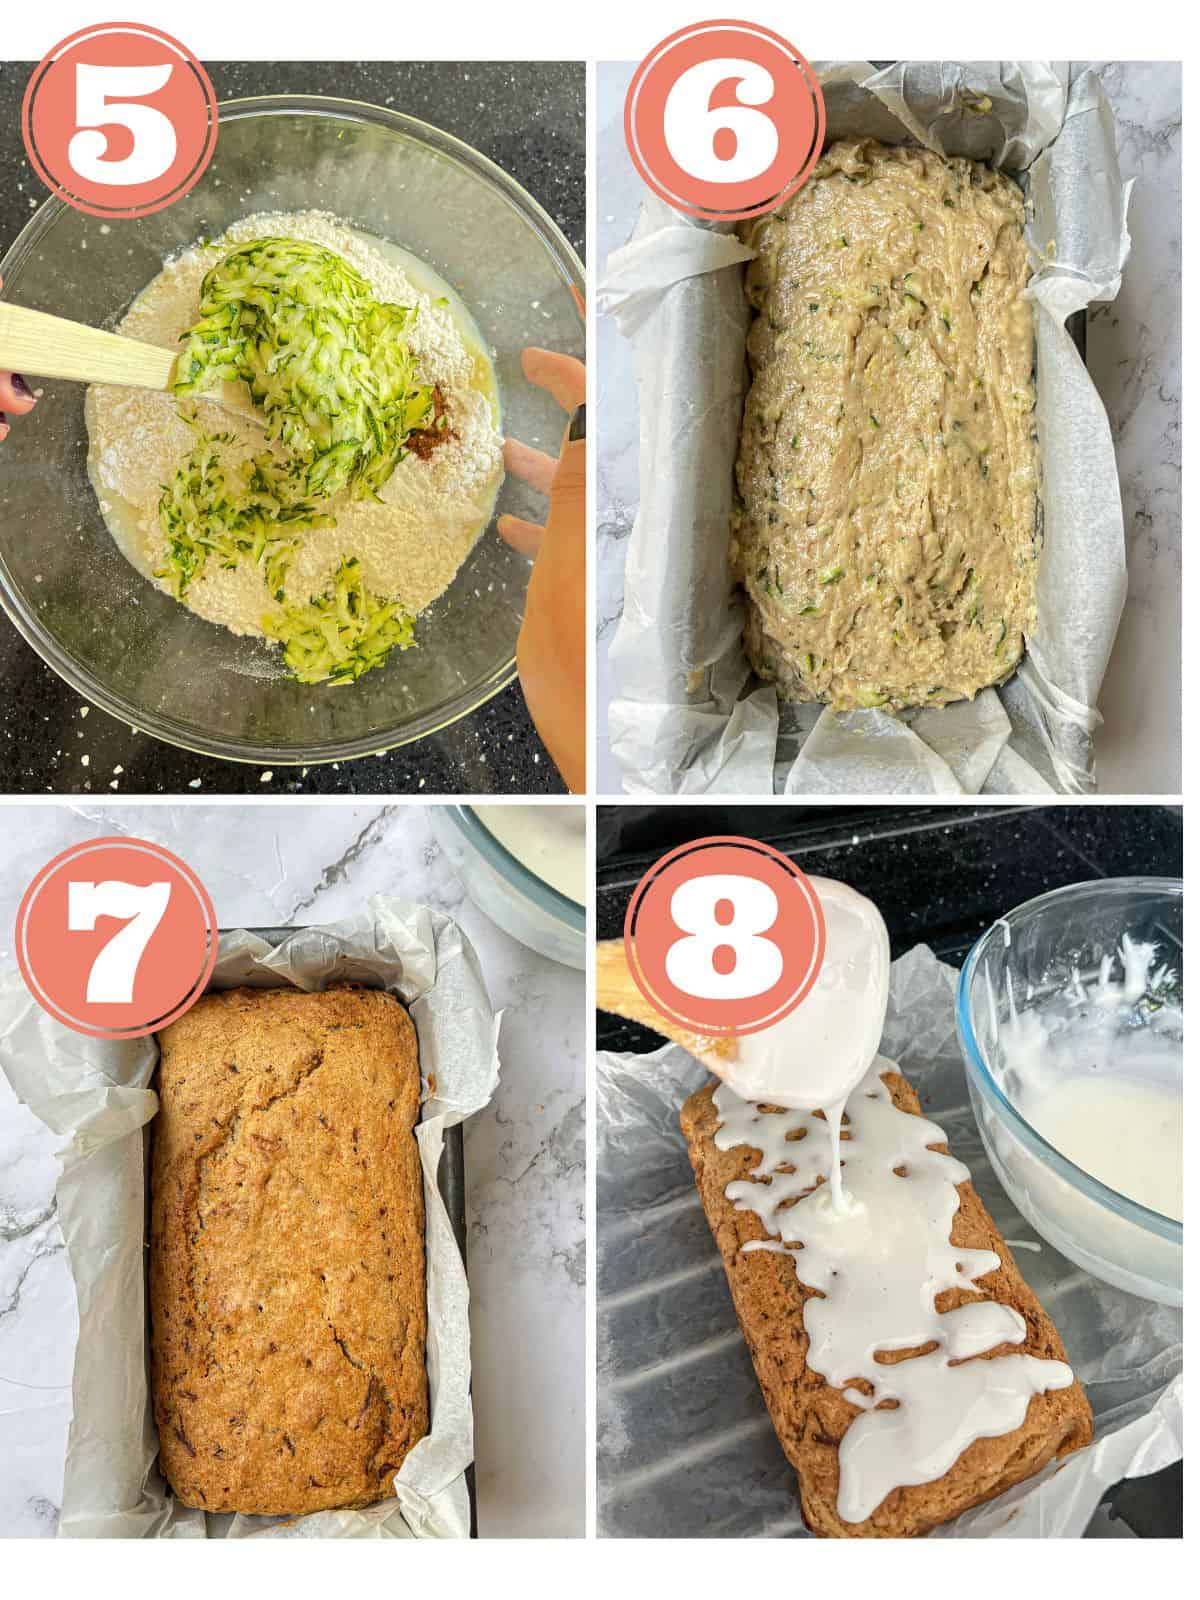 steps showing how to make a courgette cake. Mixture in bowl, batter in tin uncooked and cooked, then drizzling icing over cake.